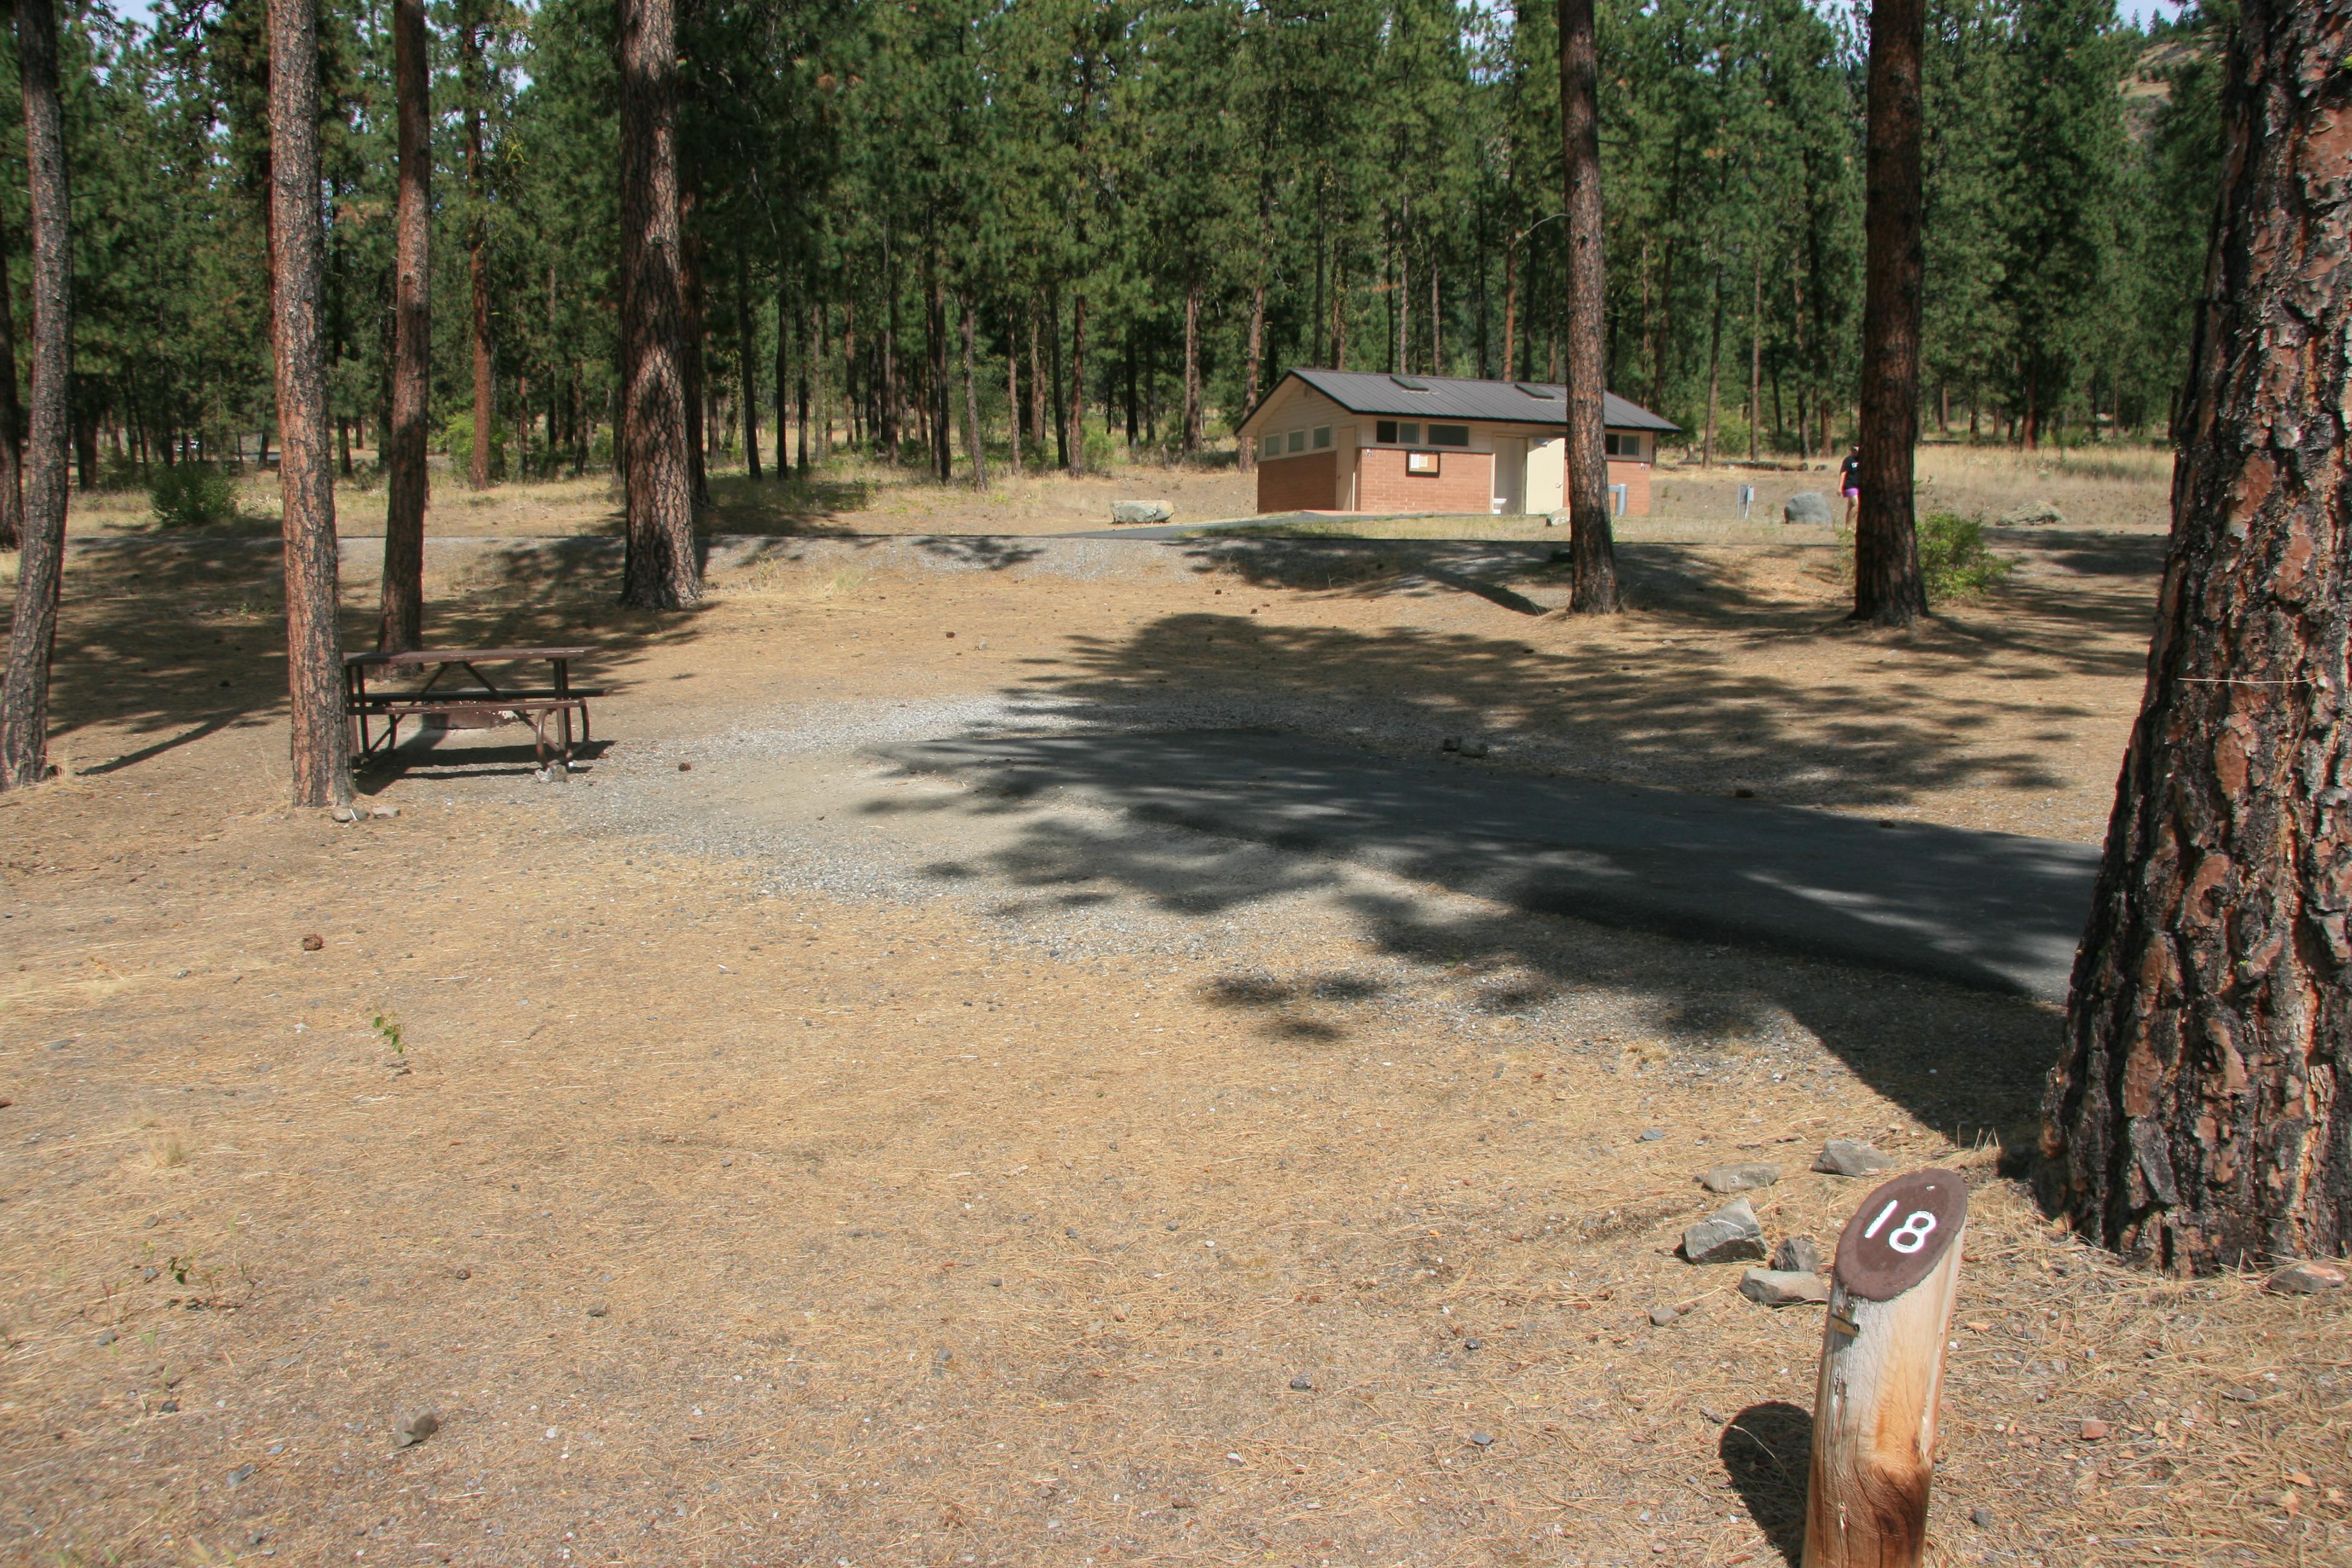 A paved campsite pad with gravel adjacent, a picnic table, and the bathroom building beyond.